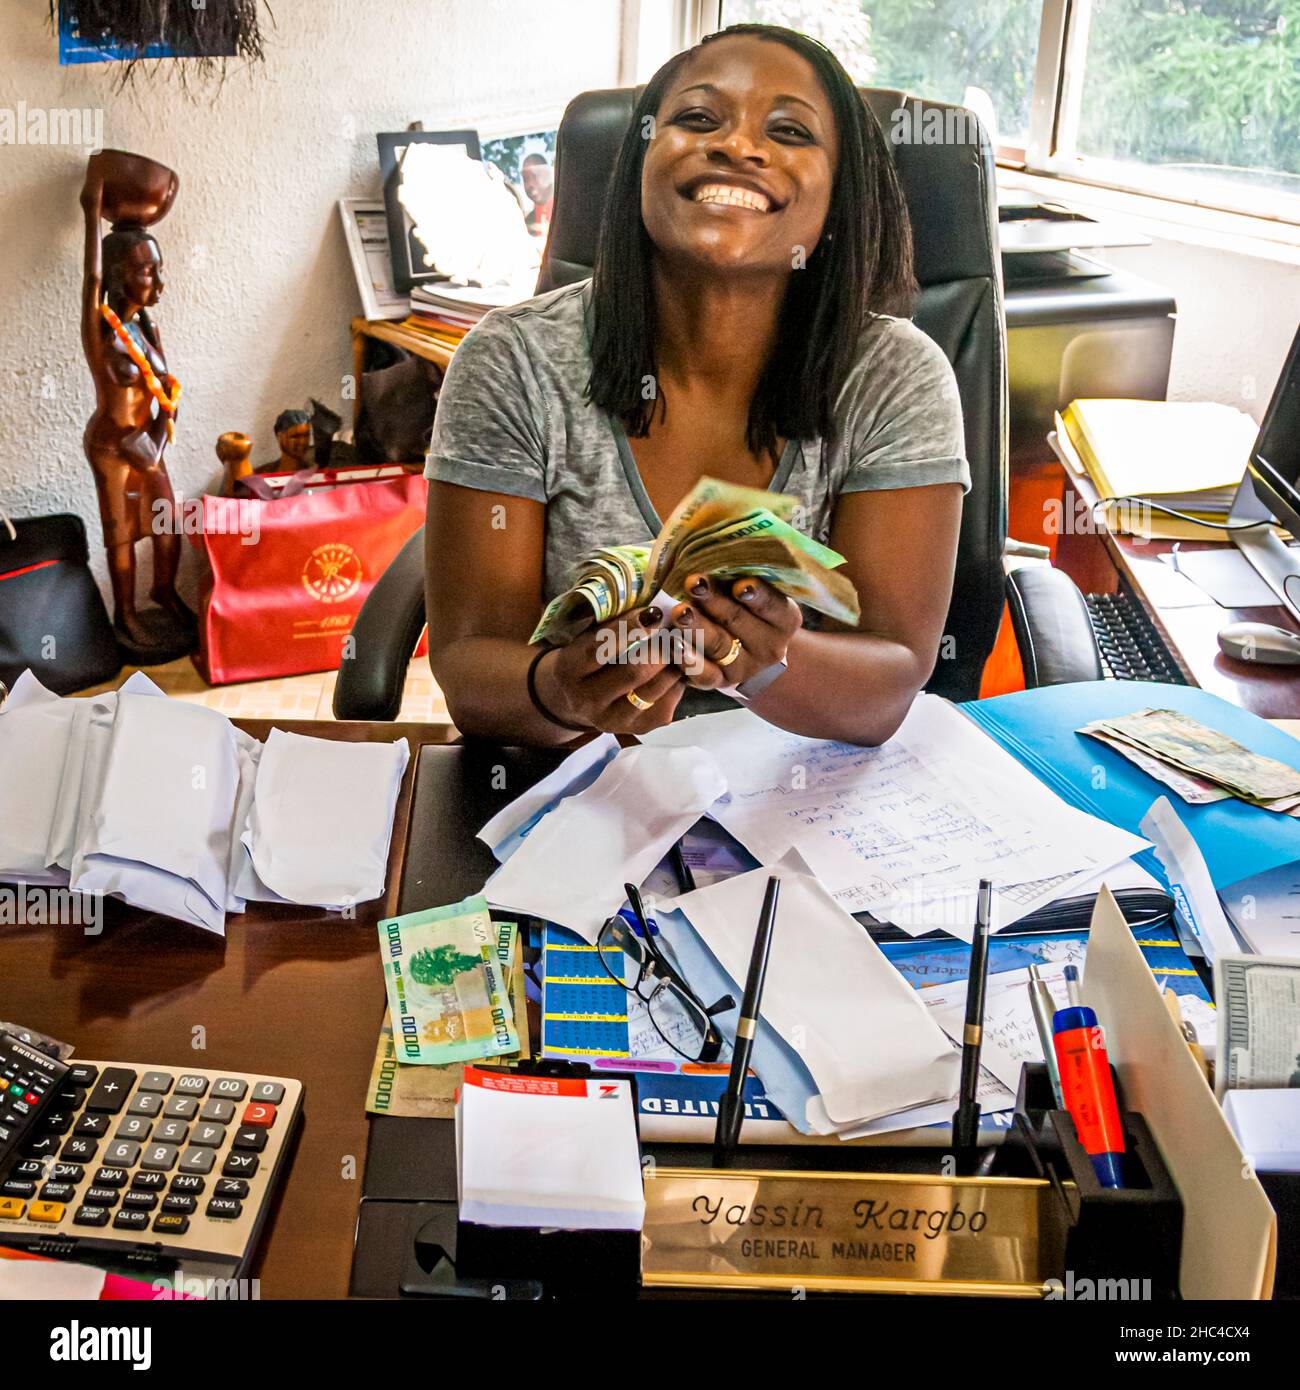 A woman counts money at a crowded desk in Hastings, Sierra Leone Stock Photo